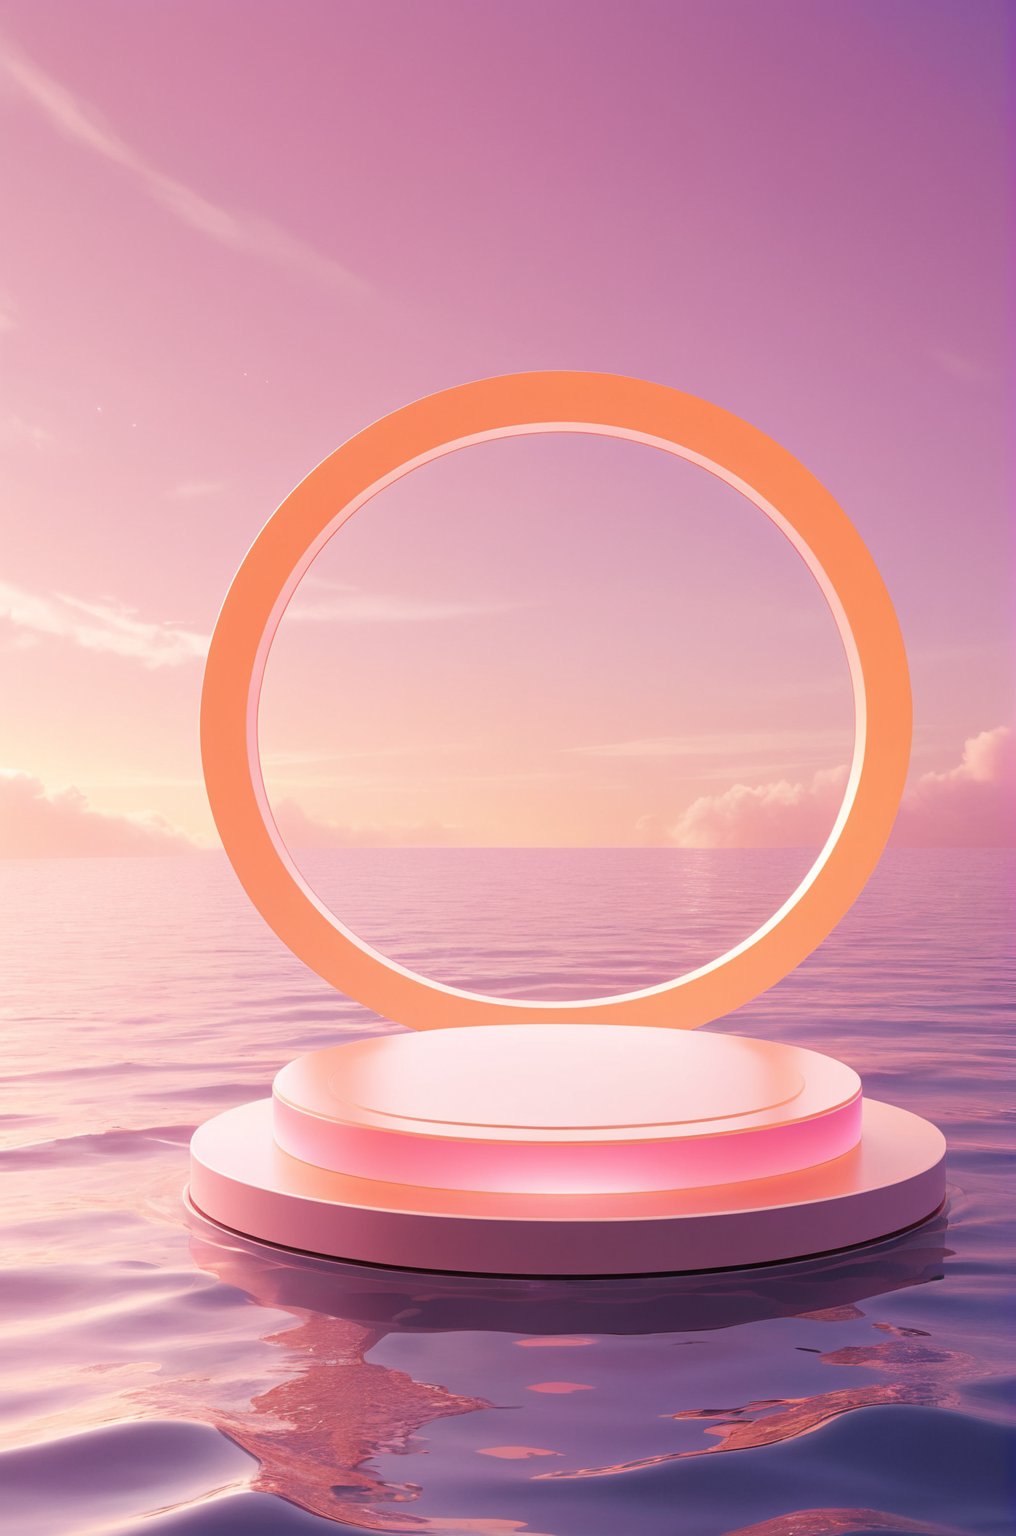 3D\(hubgstyle)\,
a round podium in the water on ocean surface in the middle, a glowing circle in the sky, sunset time, gradient orange and pink color vibe, 

professional 3d model, anime artwork pixar, 3d style, good shine, OC rendering, highly detailed, volumetric, dramatic lighting, 